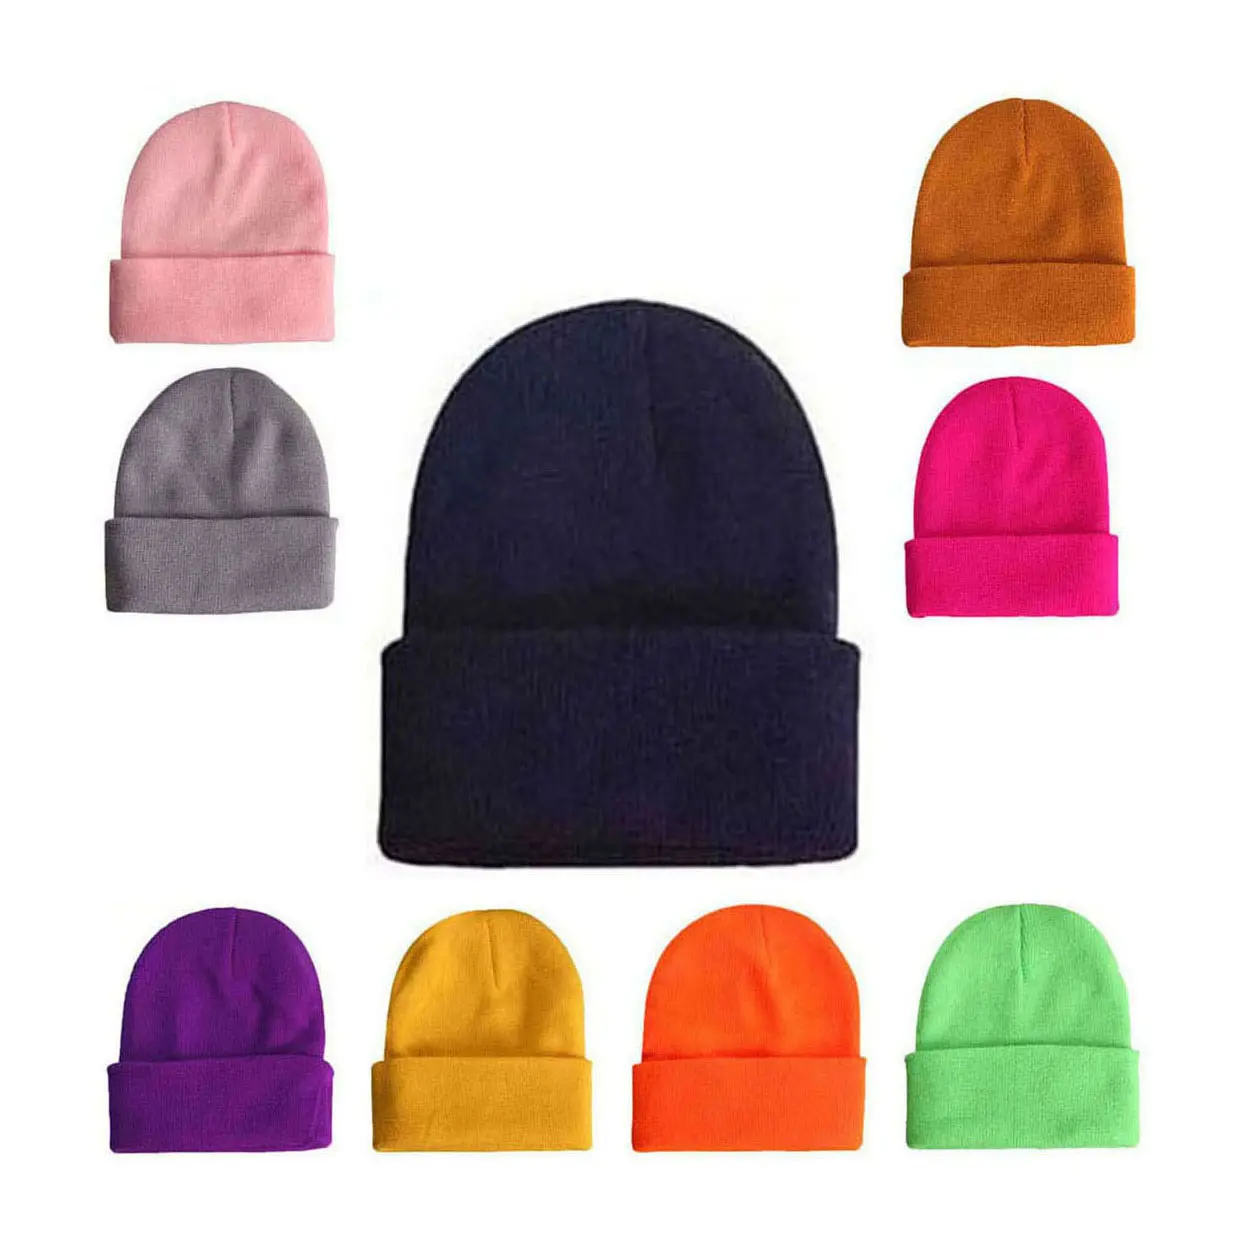 Knitting Solid Color Unisex Beanie Keep Warm Fashion New Hip Hop Winter Hat Skullies Soft Knit Skull Beanies Hats For Men Women